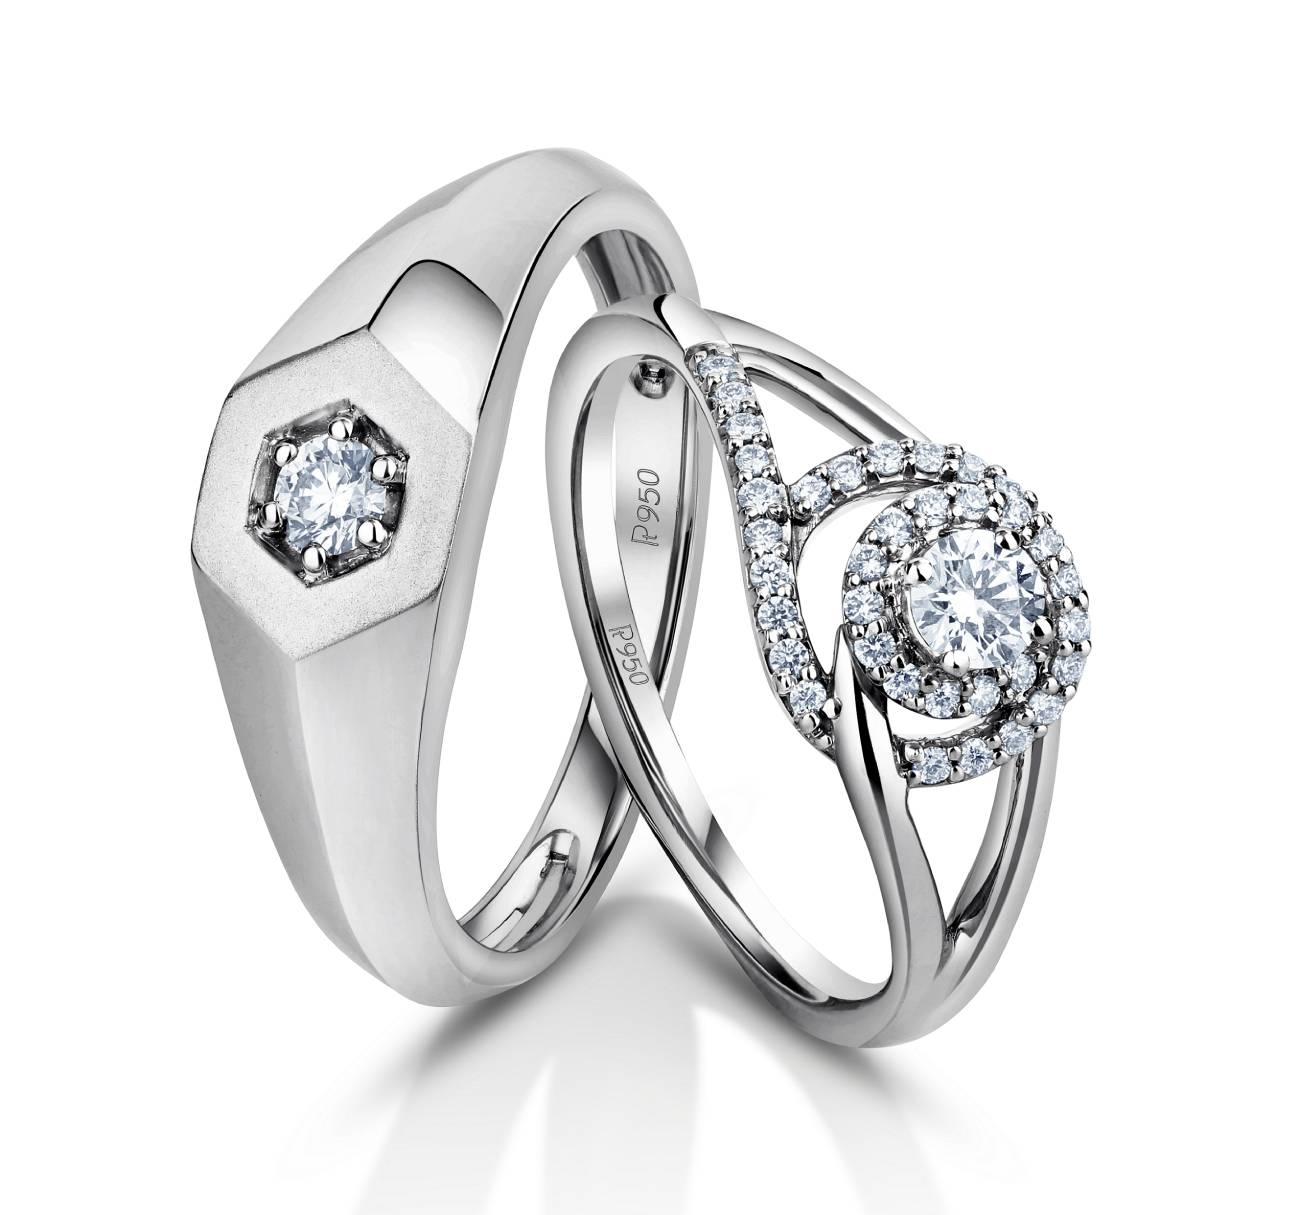 Fashion story Stylish Couple rings for Lovers, Platinum Plated Silver  Crystal Elegant Couple Rings with Beautiful Diamond stone Rings for Men and  Women Alloy Crystal Silver Plated Ring Set Price in India -